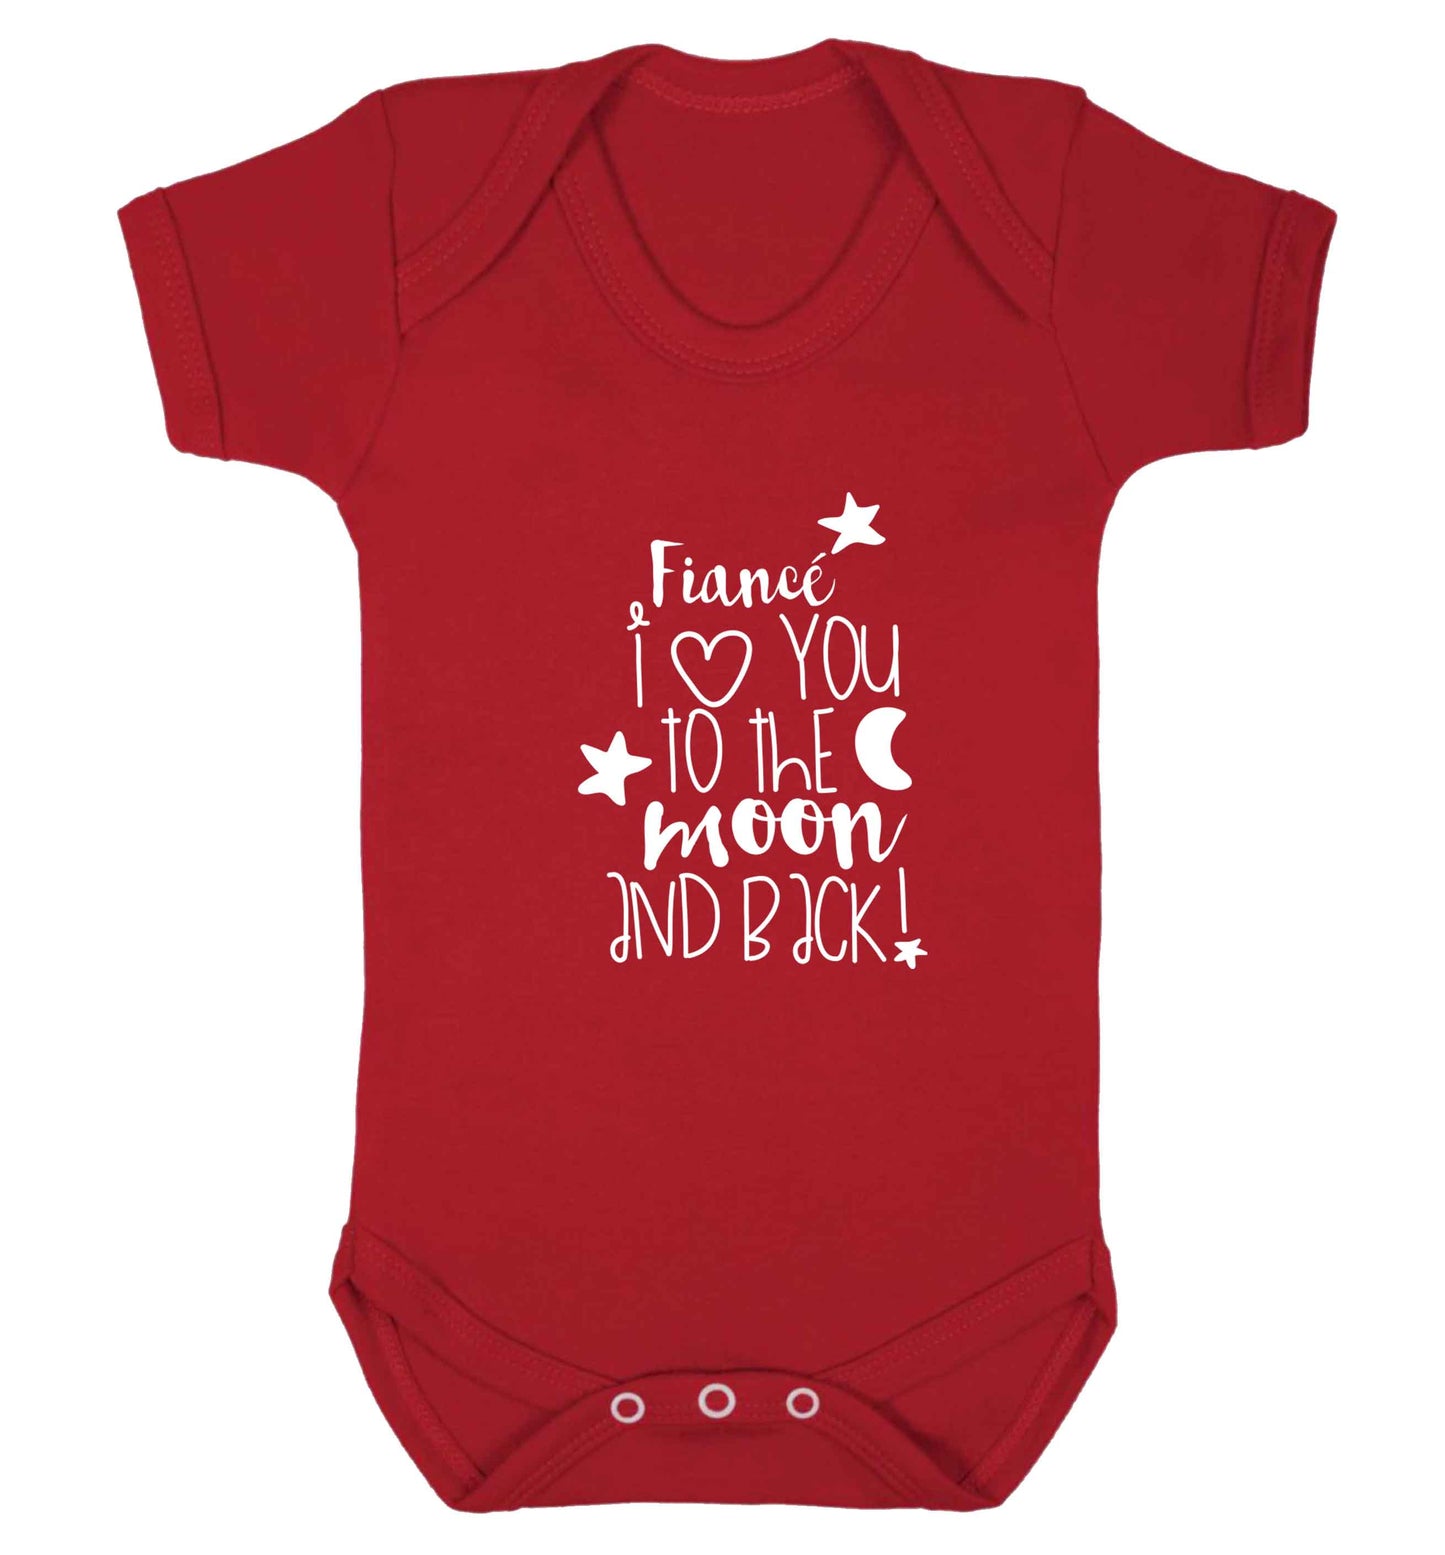 Fianc√© I love you to the moon and back baby vest red 18-24 months